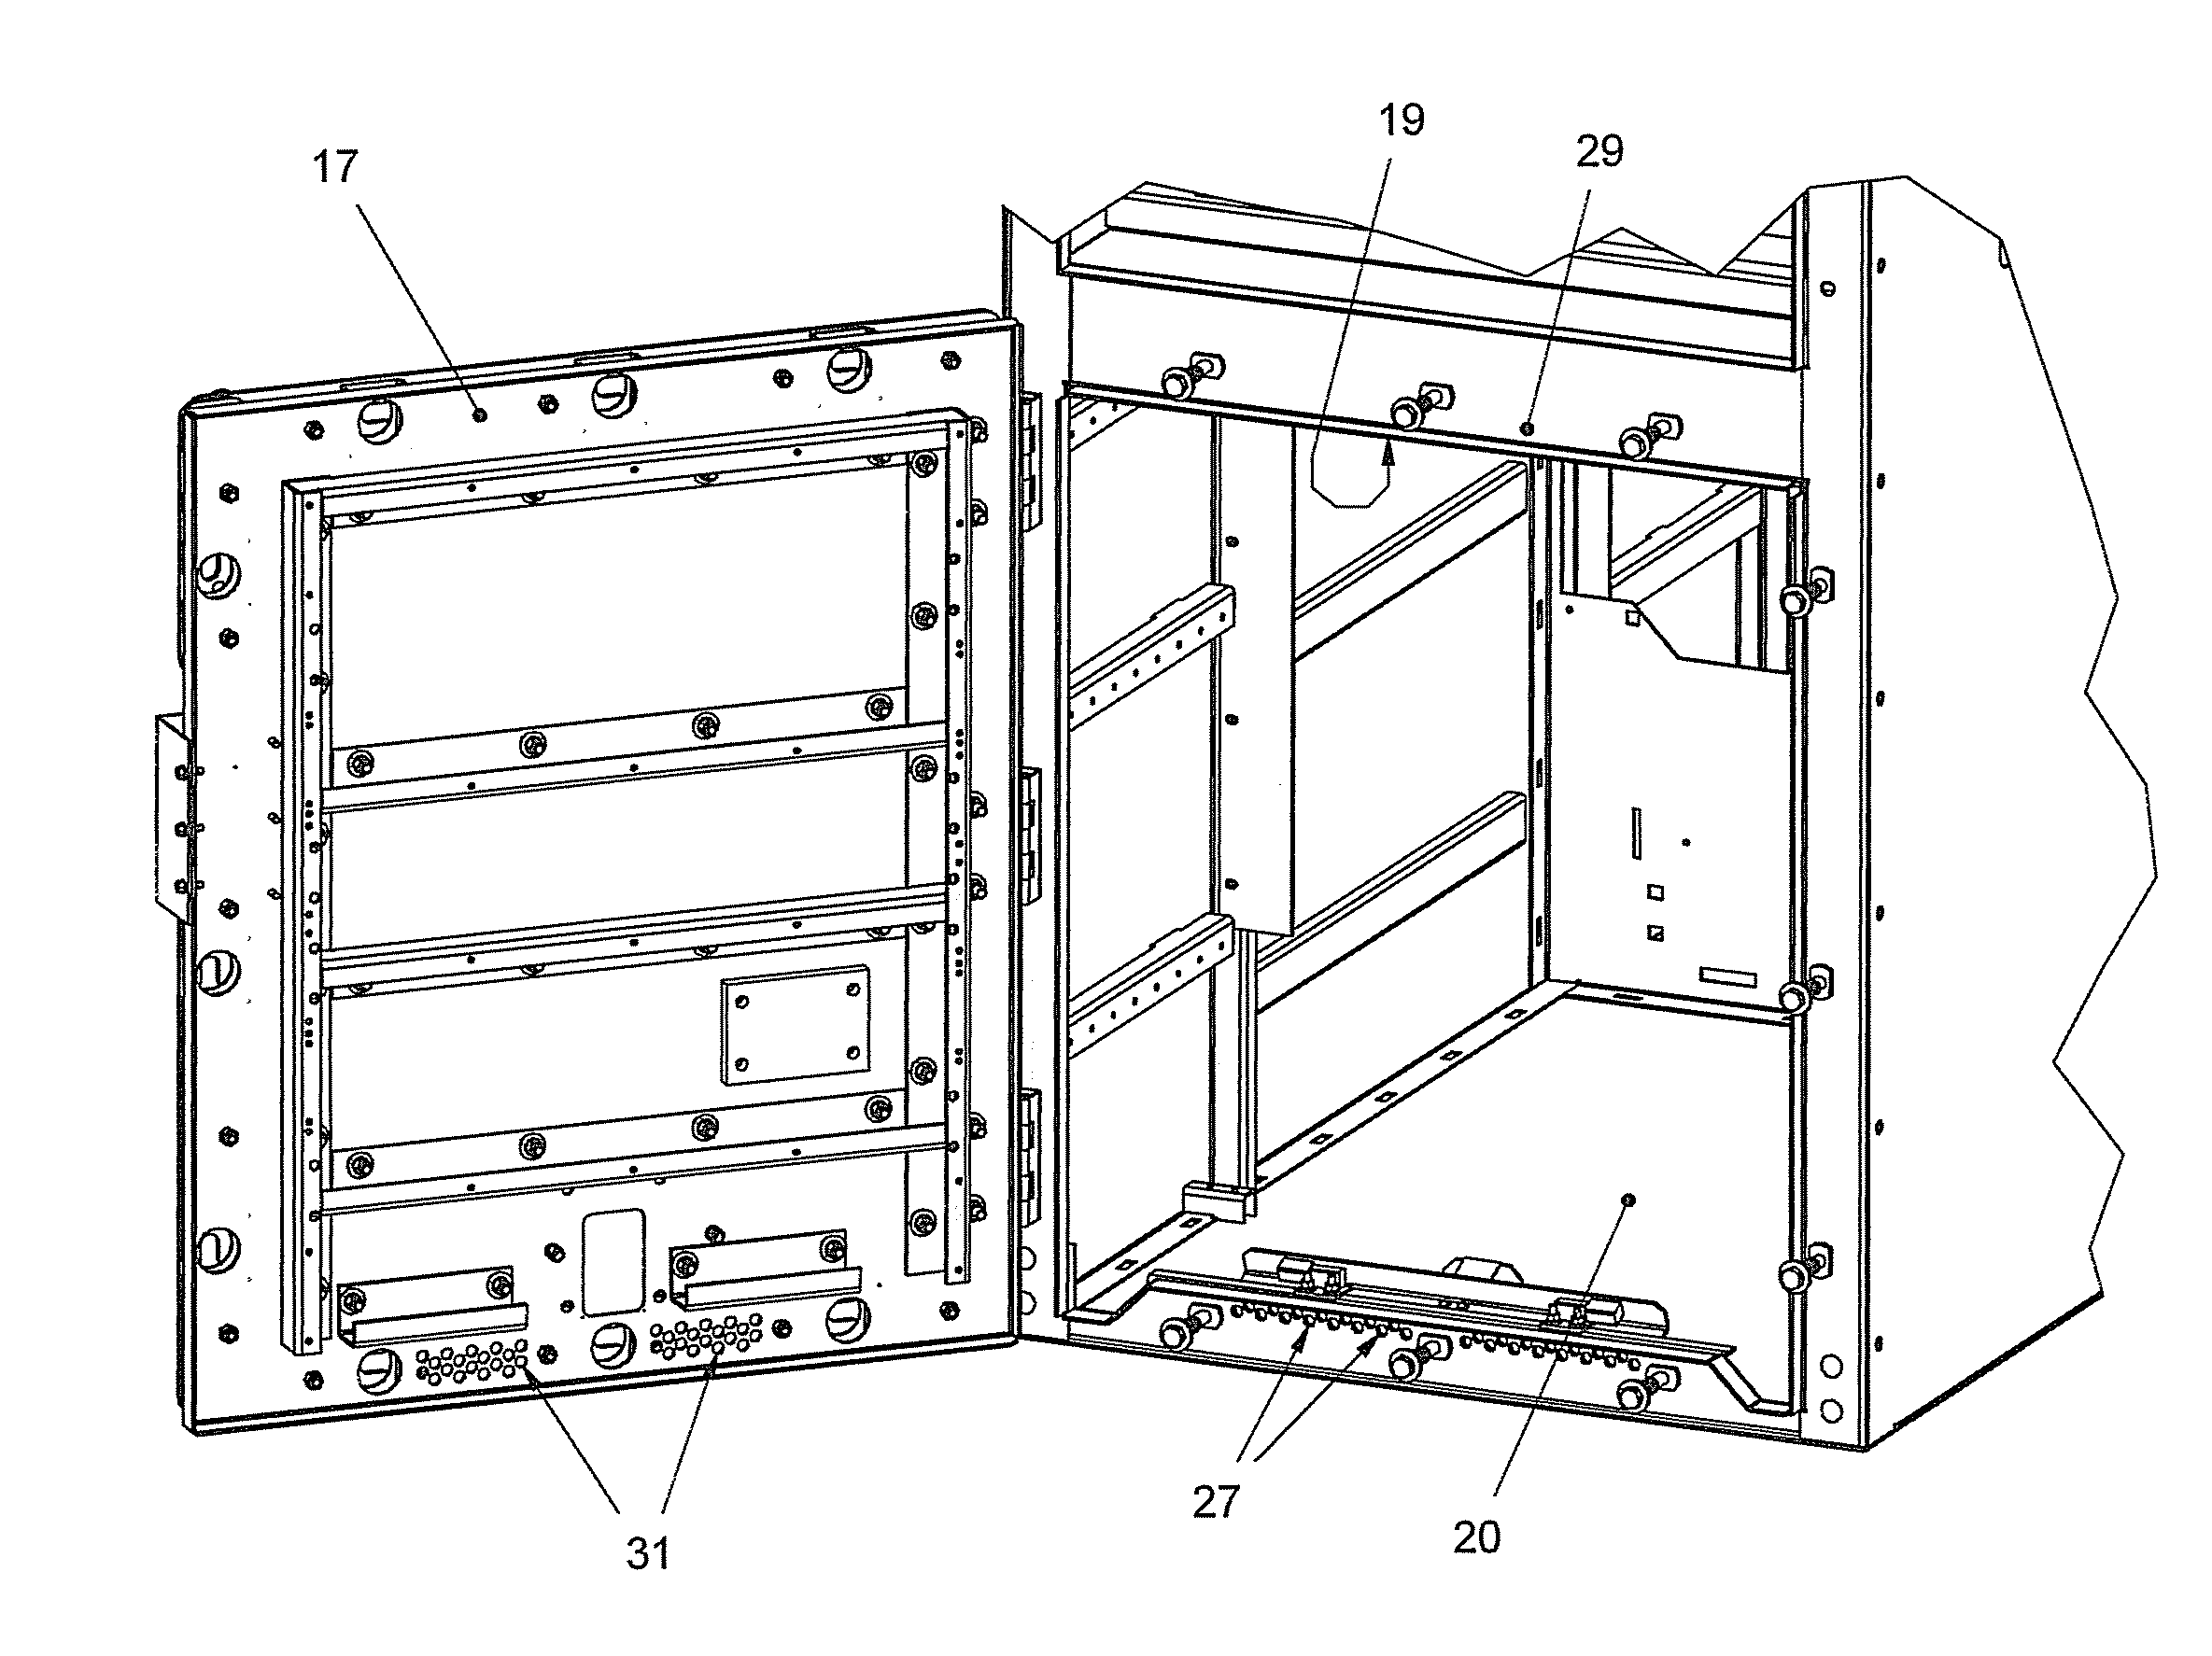 Arc-resistant switchgear enclosure with latch for vent flap